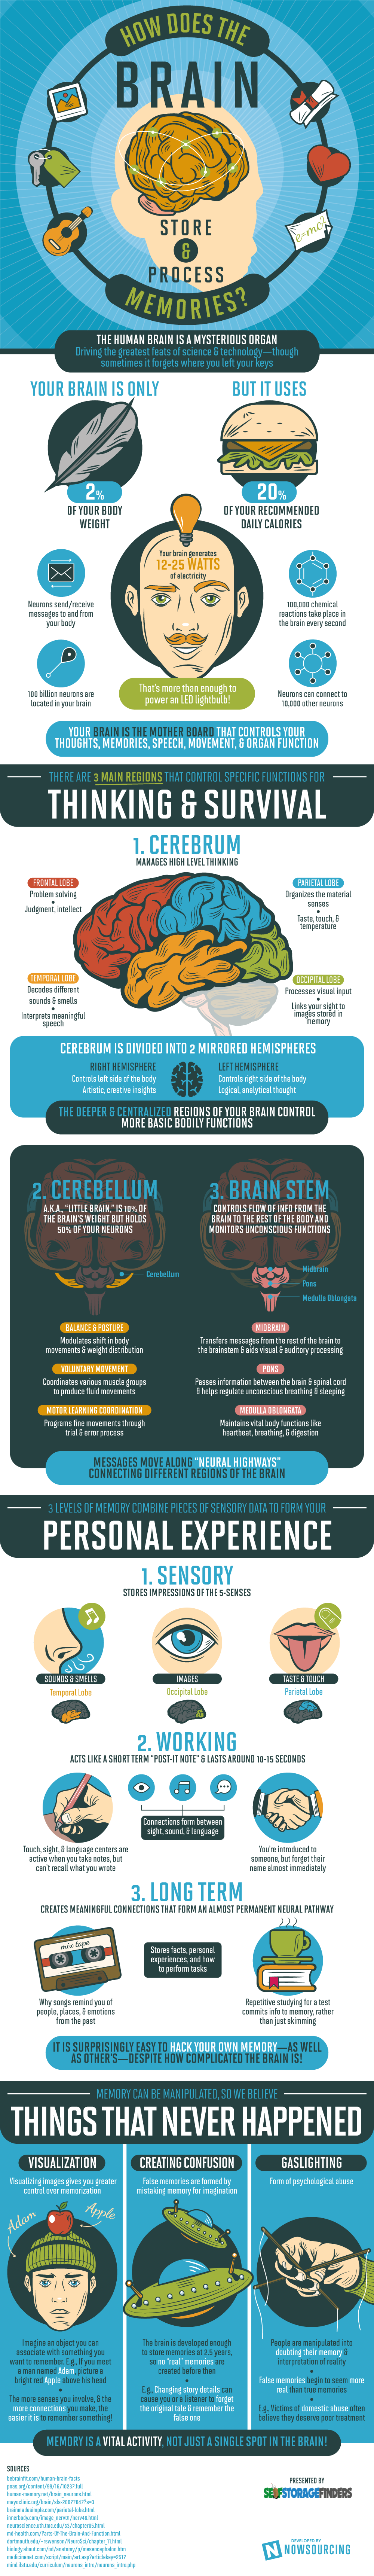 How Your Brain Stores and Processes Memories - #infographic